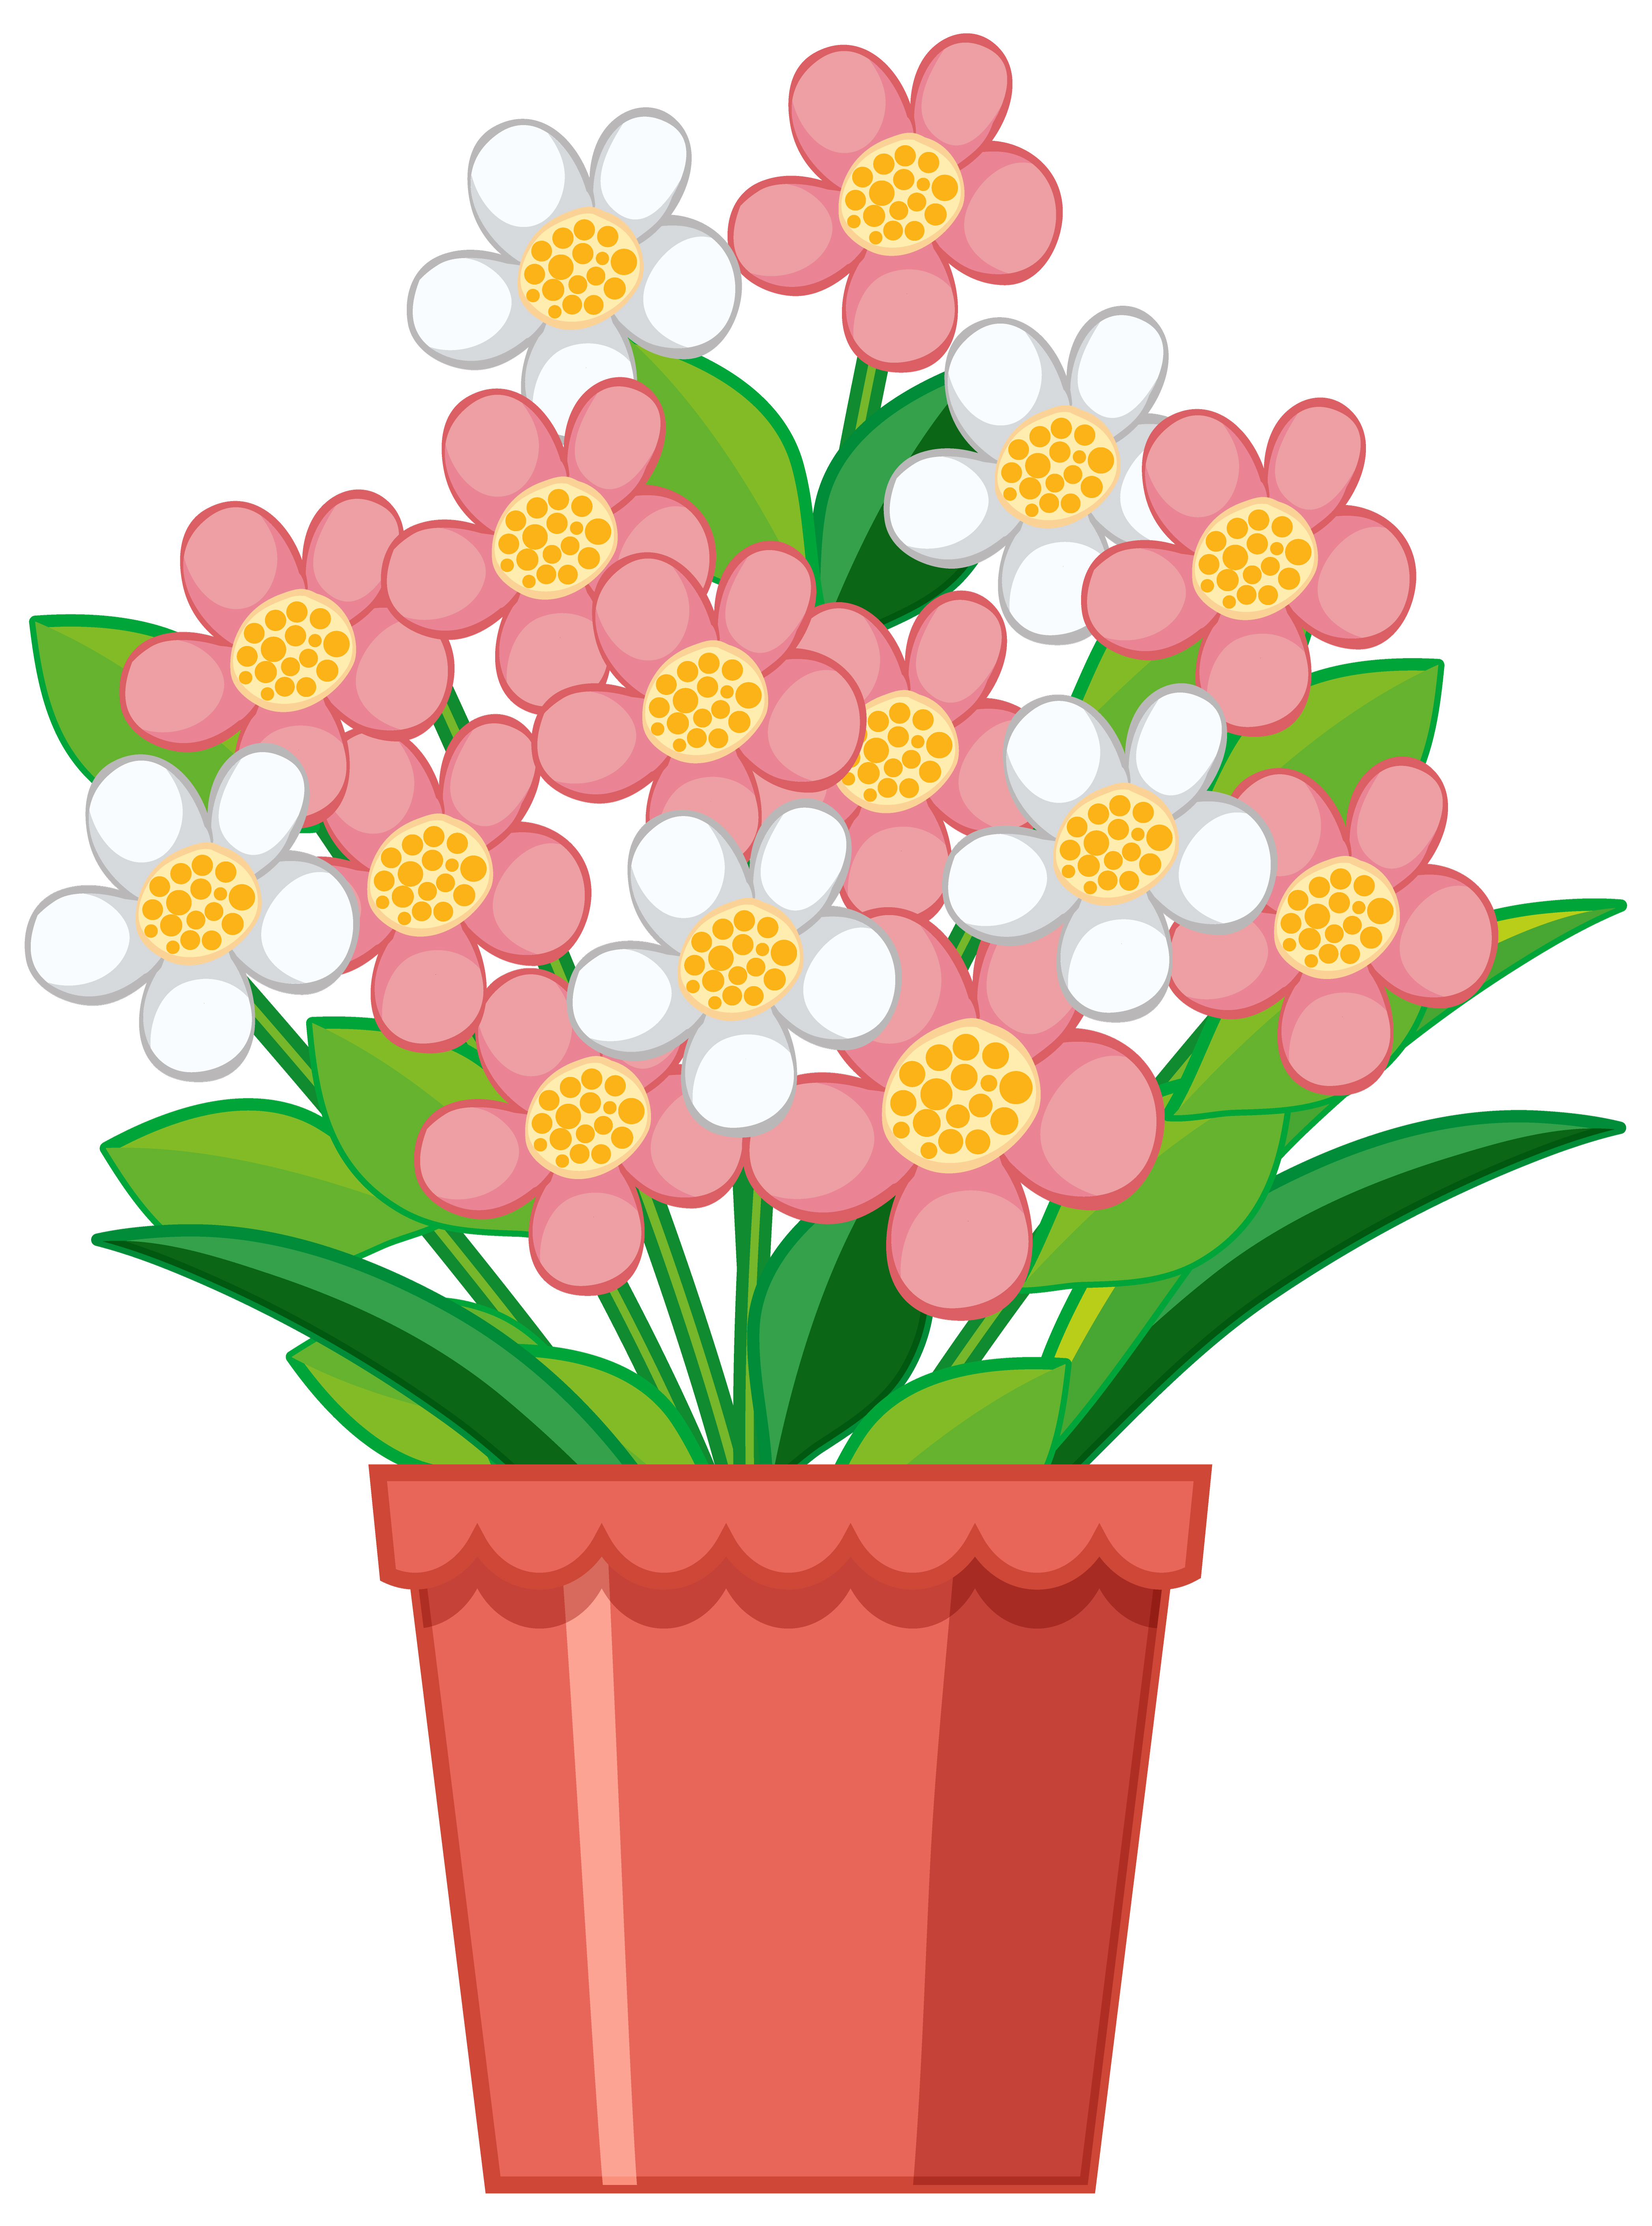 https://static.vecteezy.com/system/resources/previews/001/500/354/original/beautiful-flower-in-clay-pot-on-white-background-free-vector.jpg